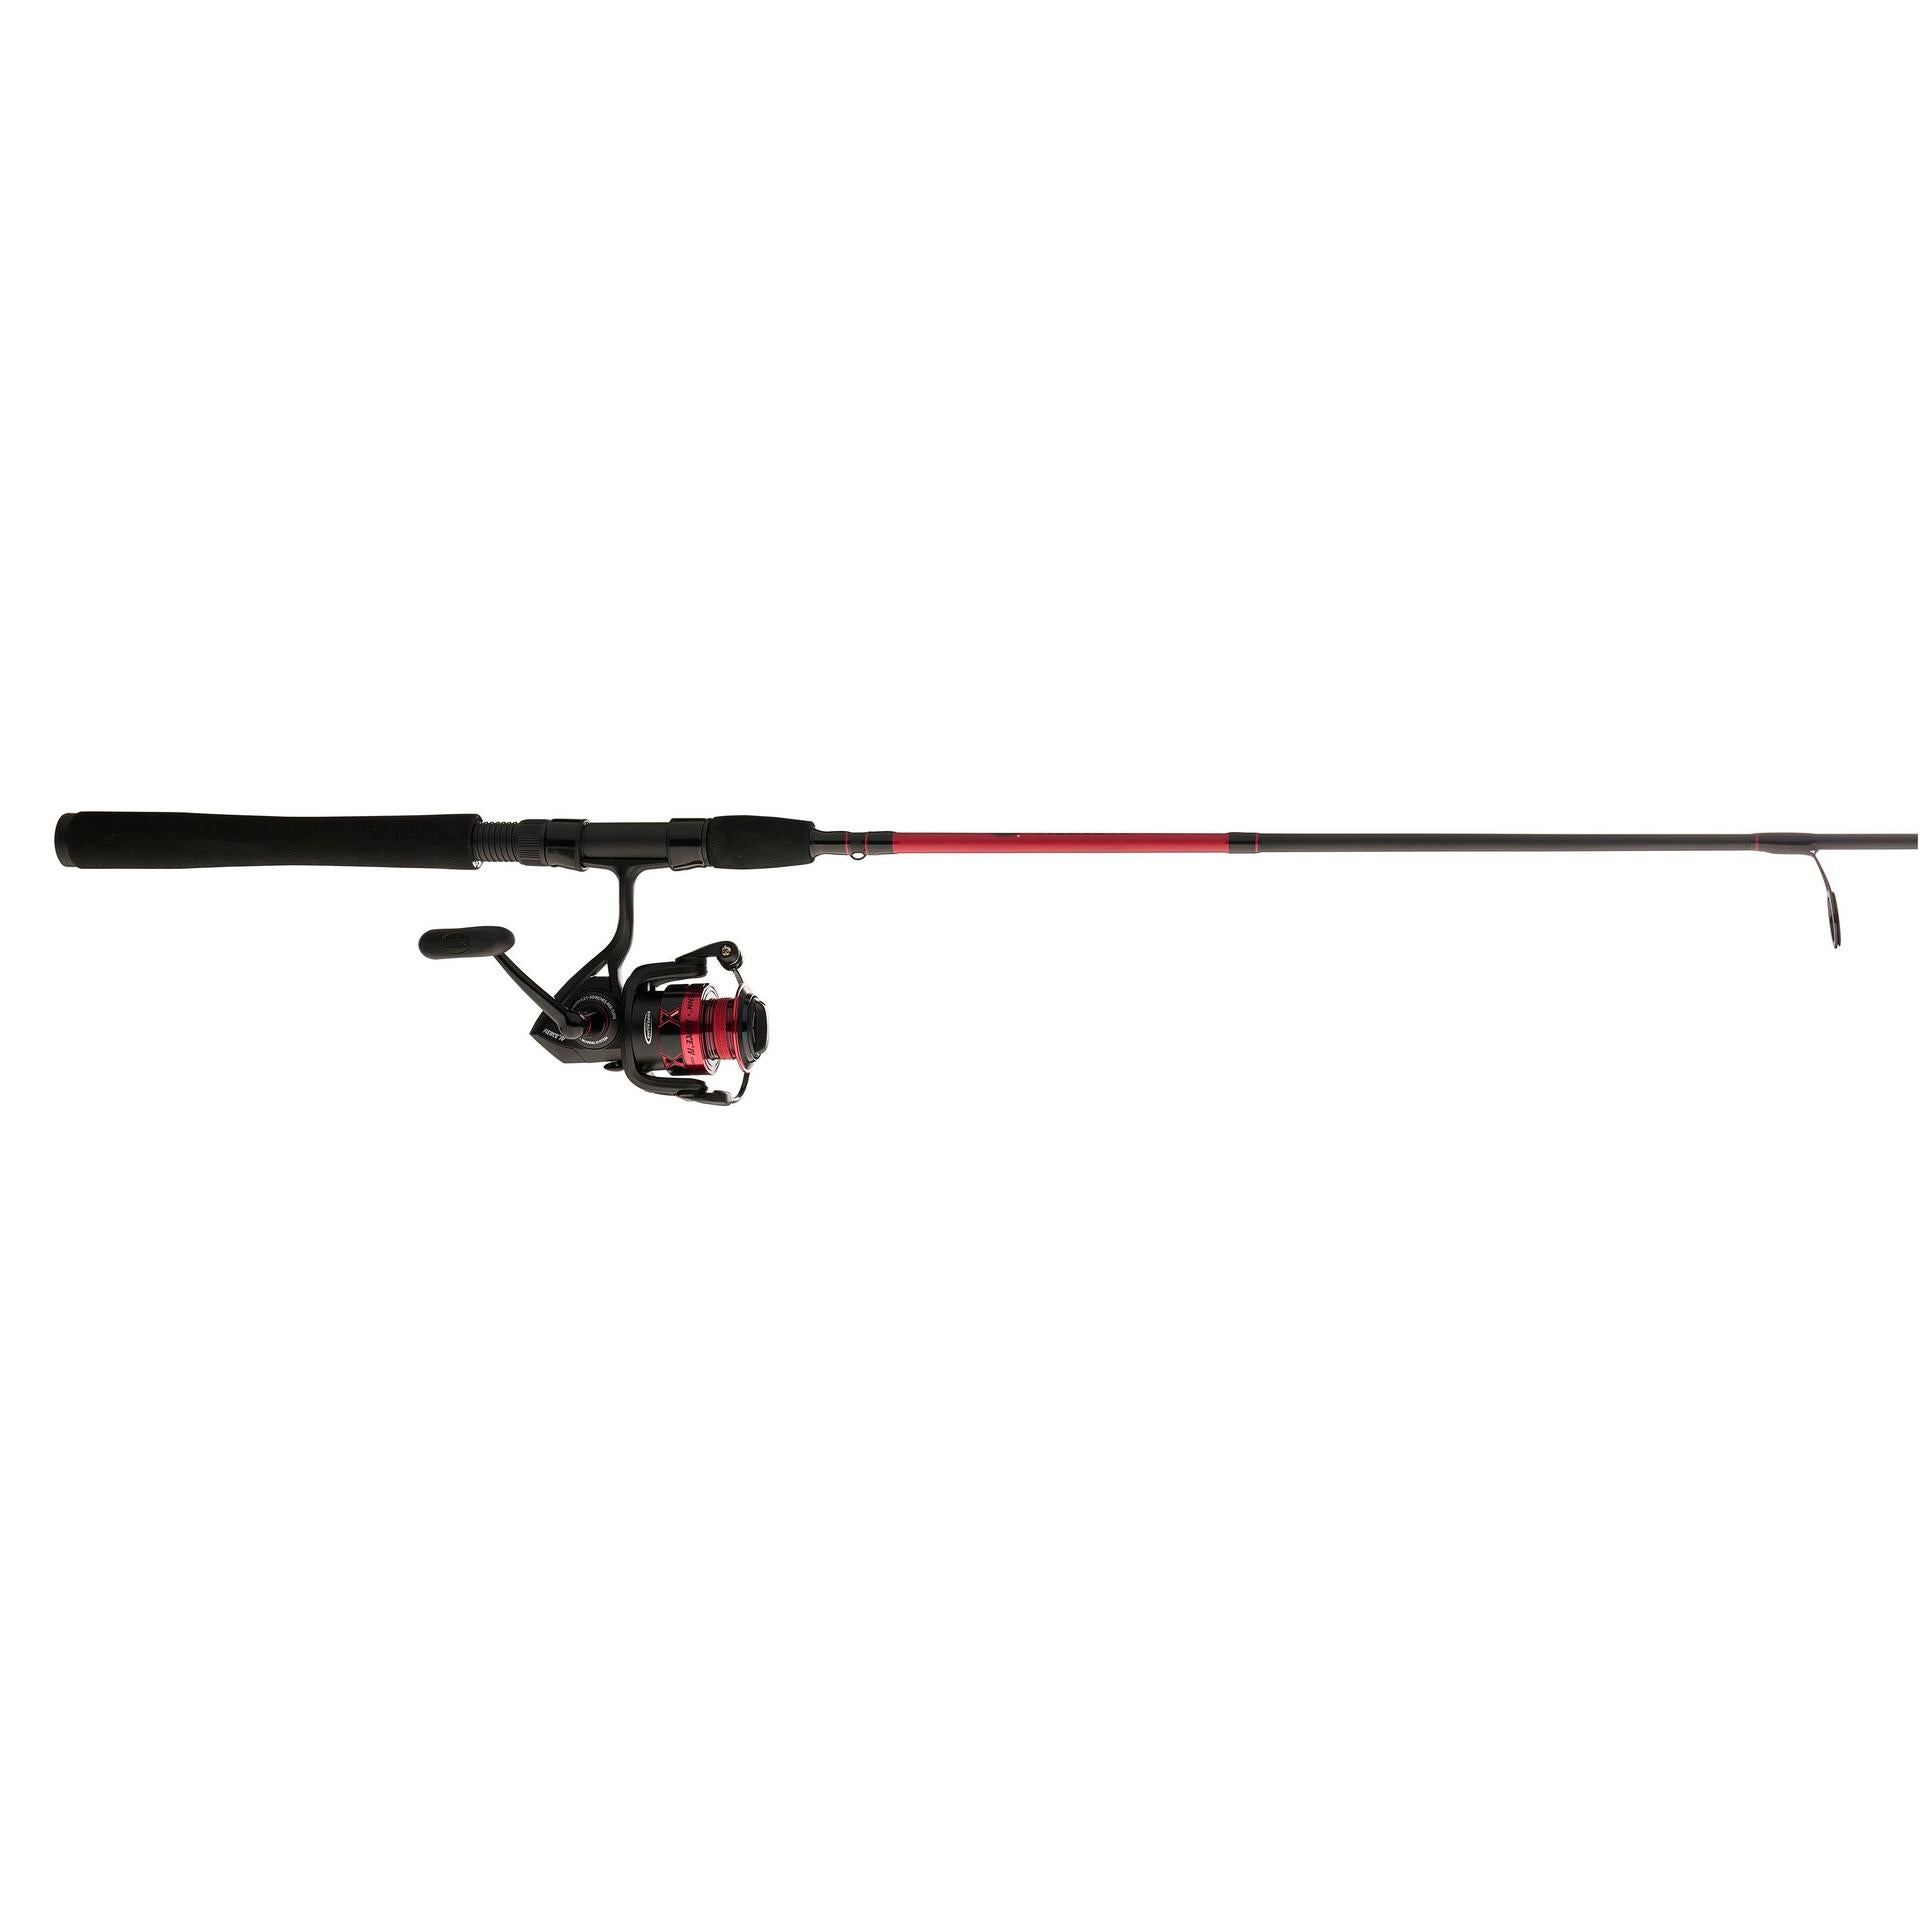 Black Max & Max X Spinning Reel and Fishing Rod Combo